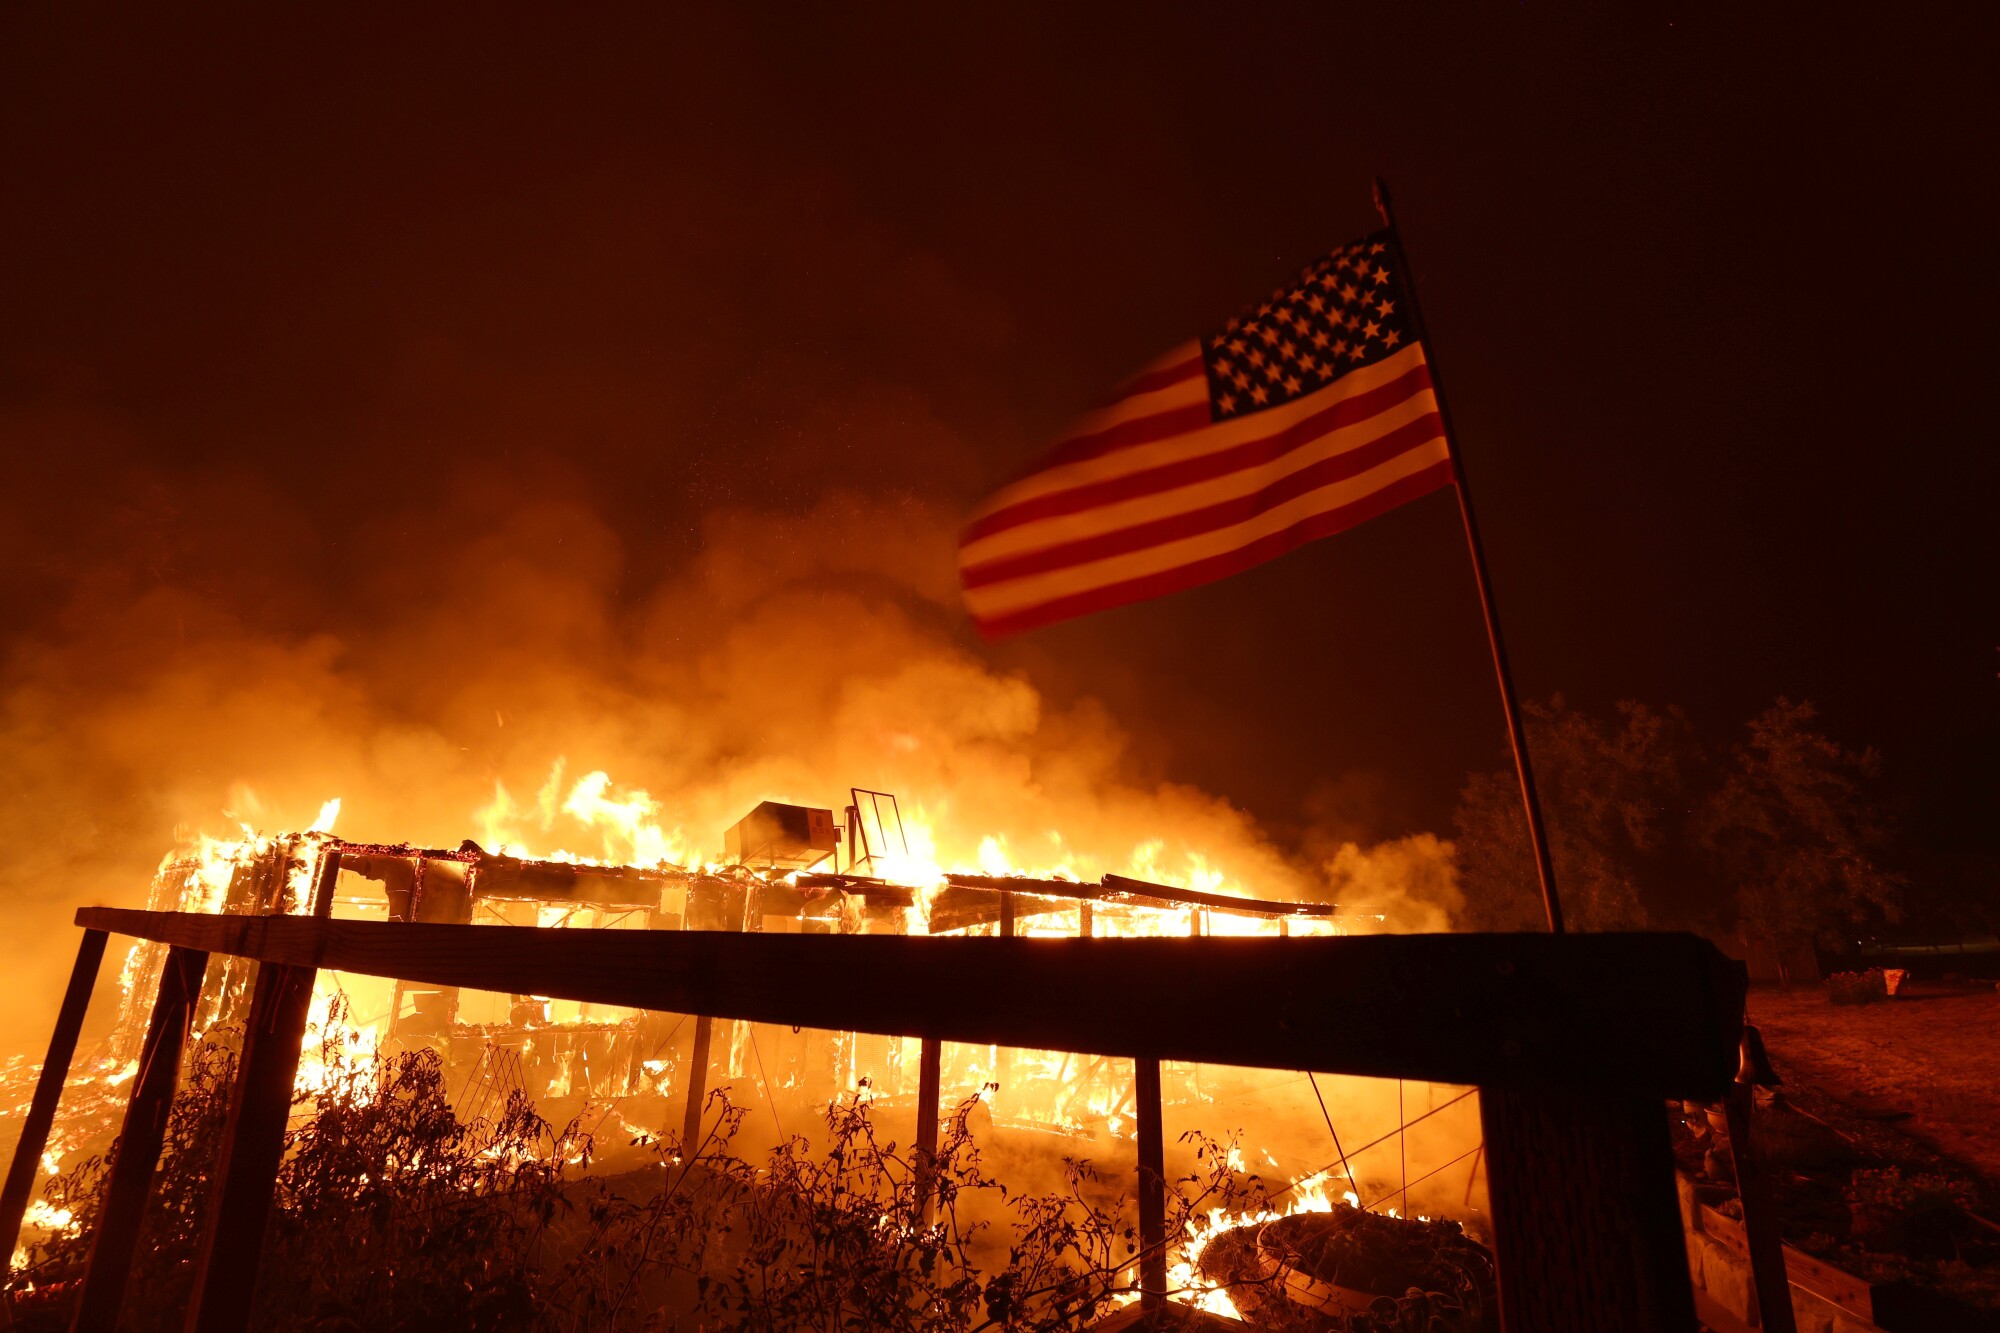 A house burns as does the American flag.